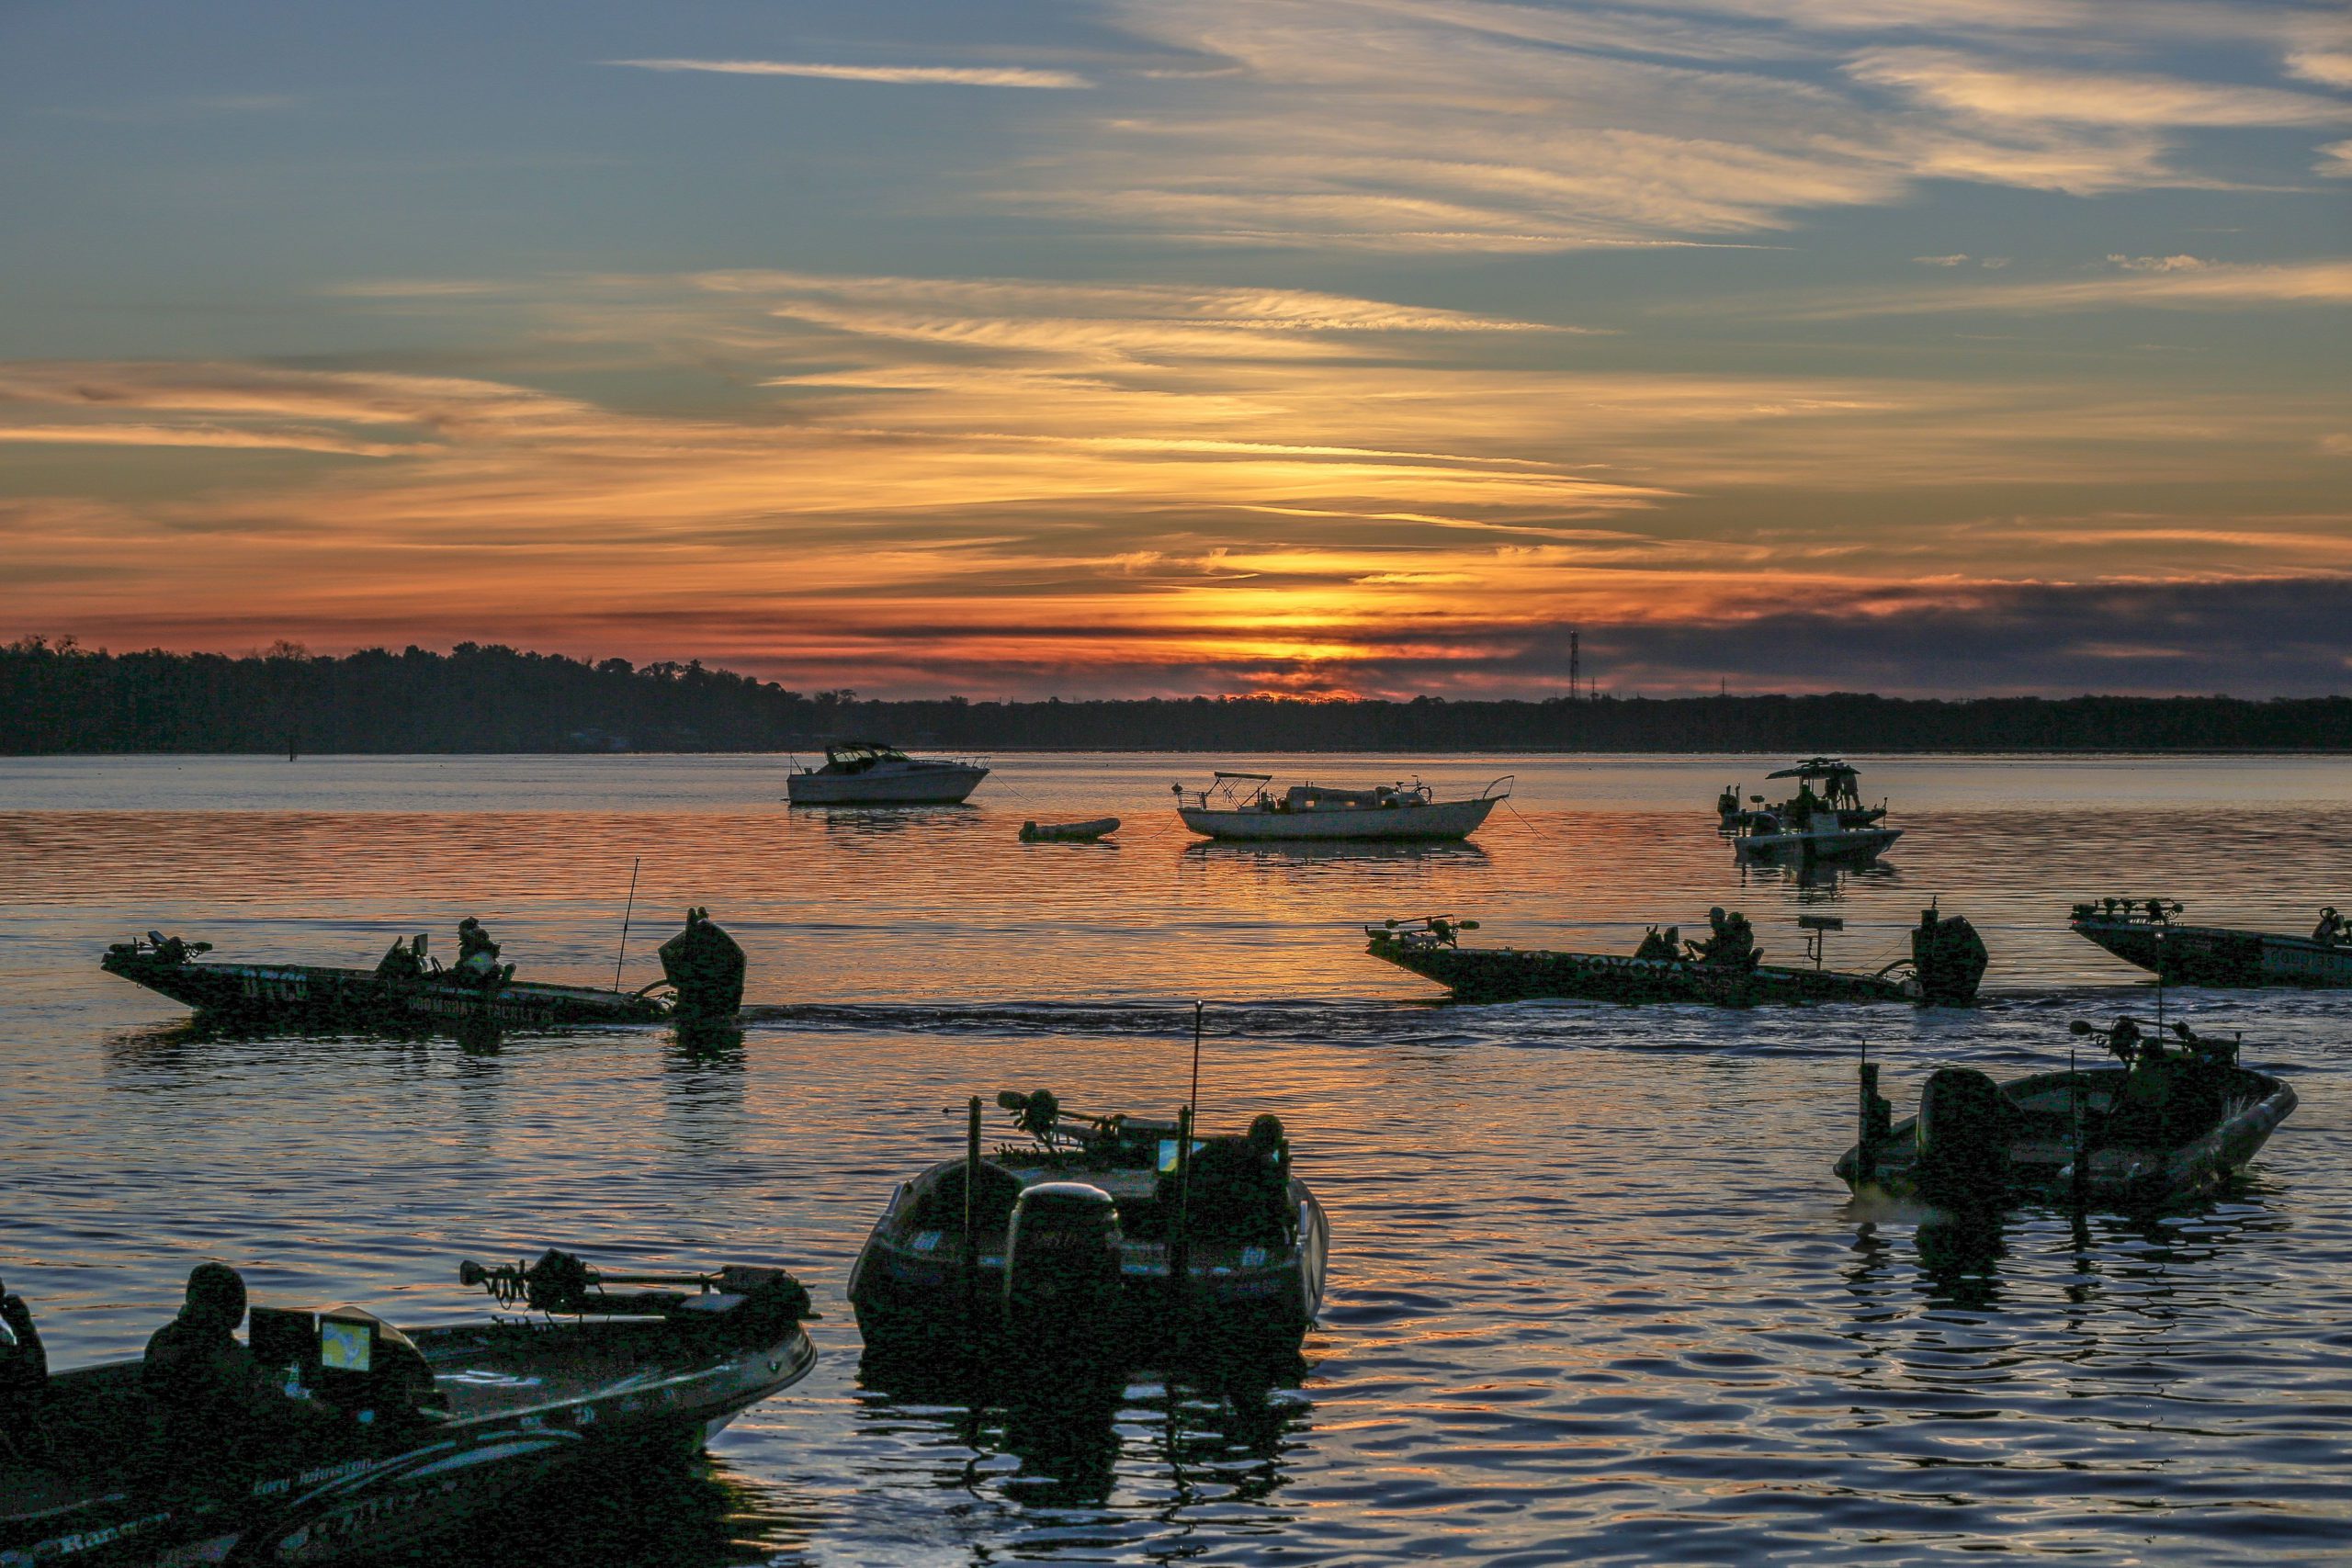 B.A.S.S. Officials Announce 2022 Schedule For Bassmaster Elite Series